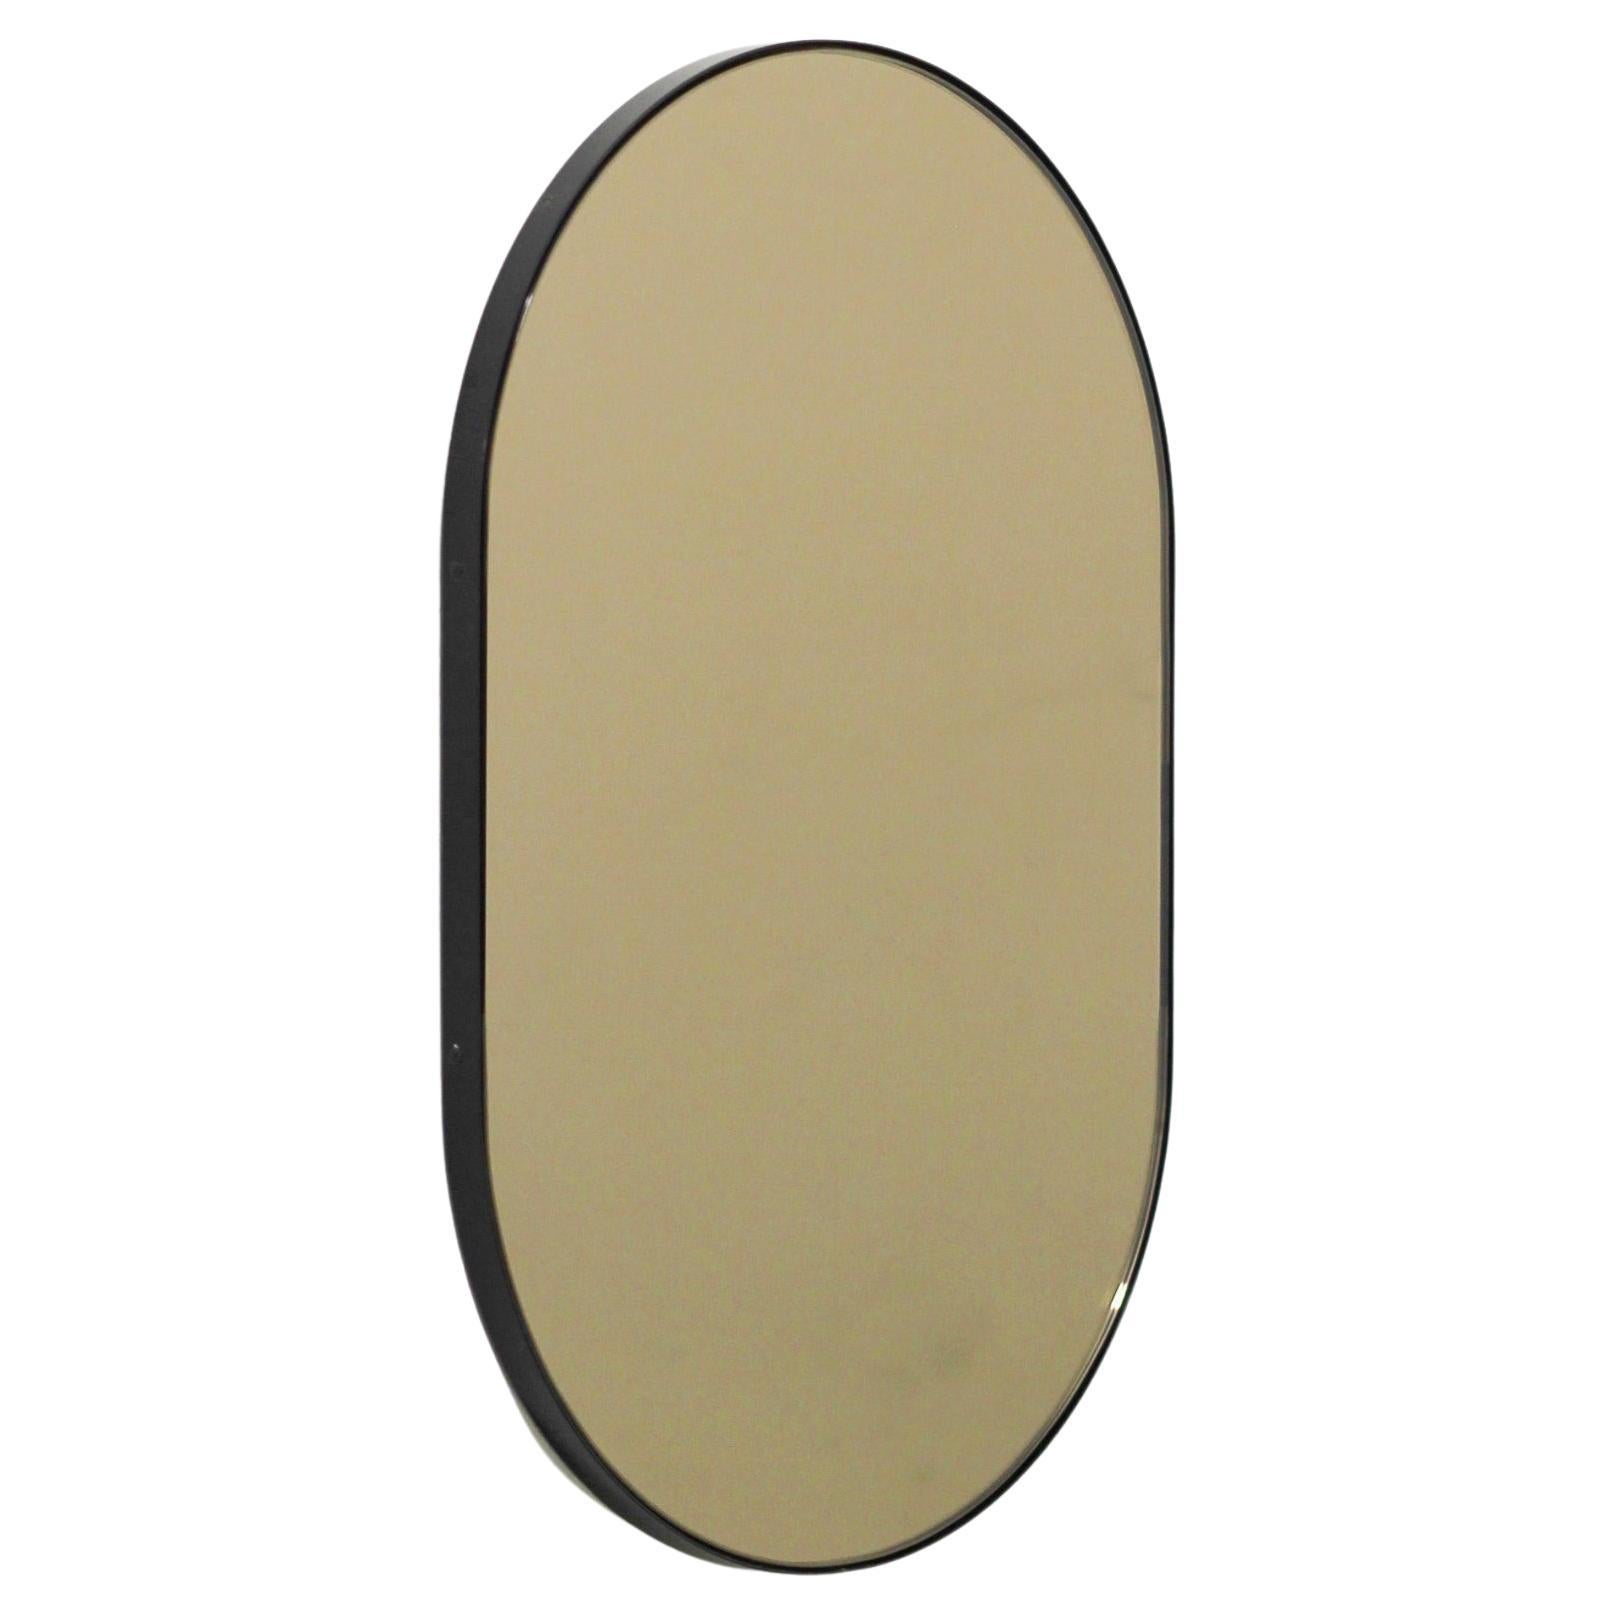 Capsula Capsule shaped Bronze Contemporary Mirror with Black Frame, Large